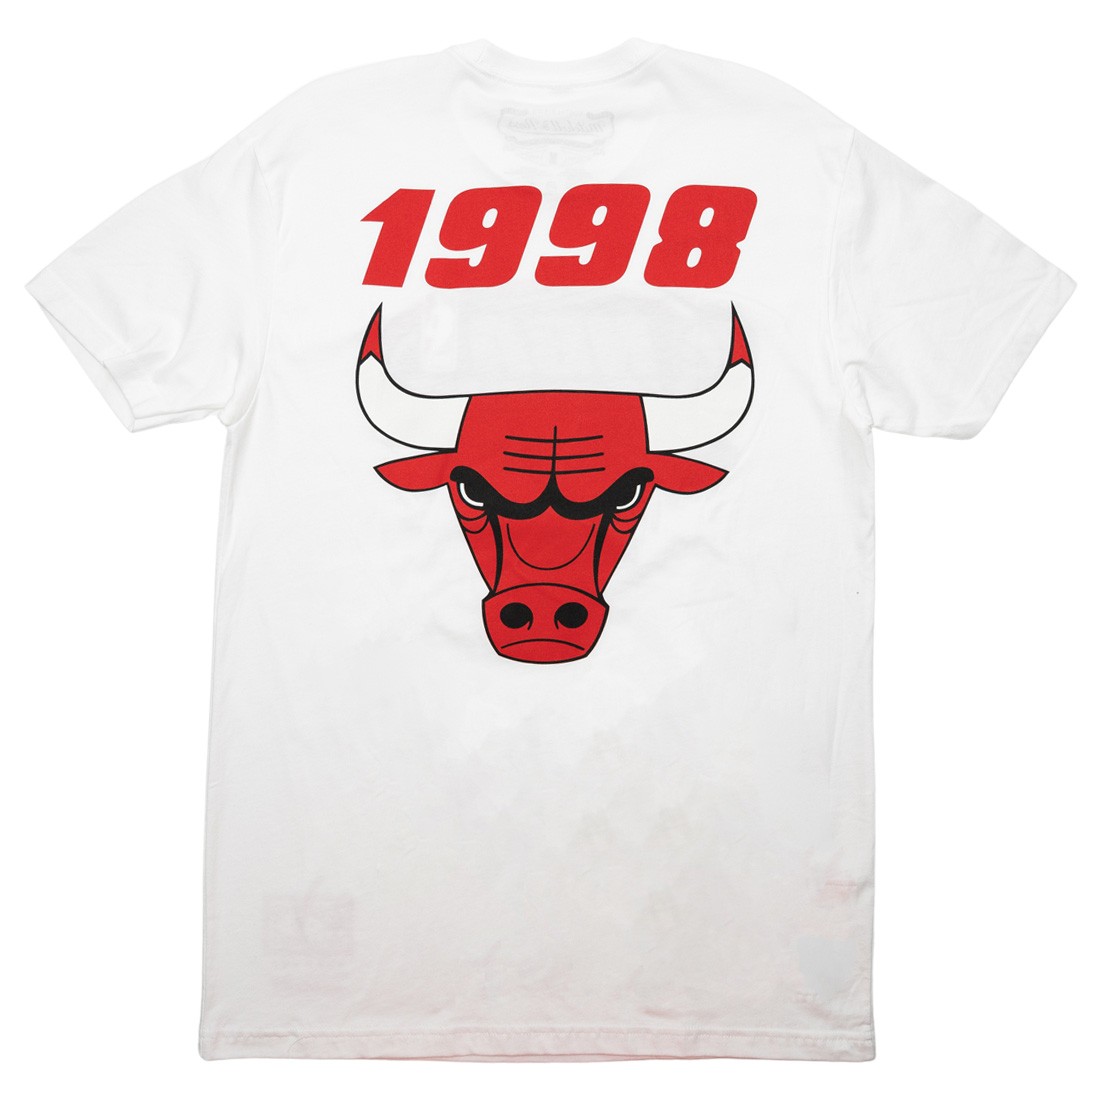 the finals white t-shirt